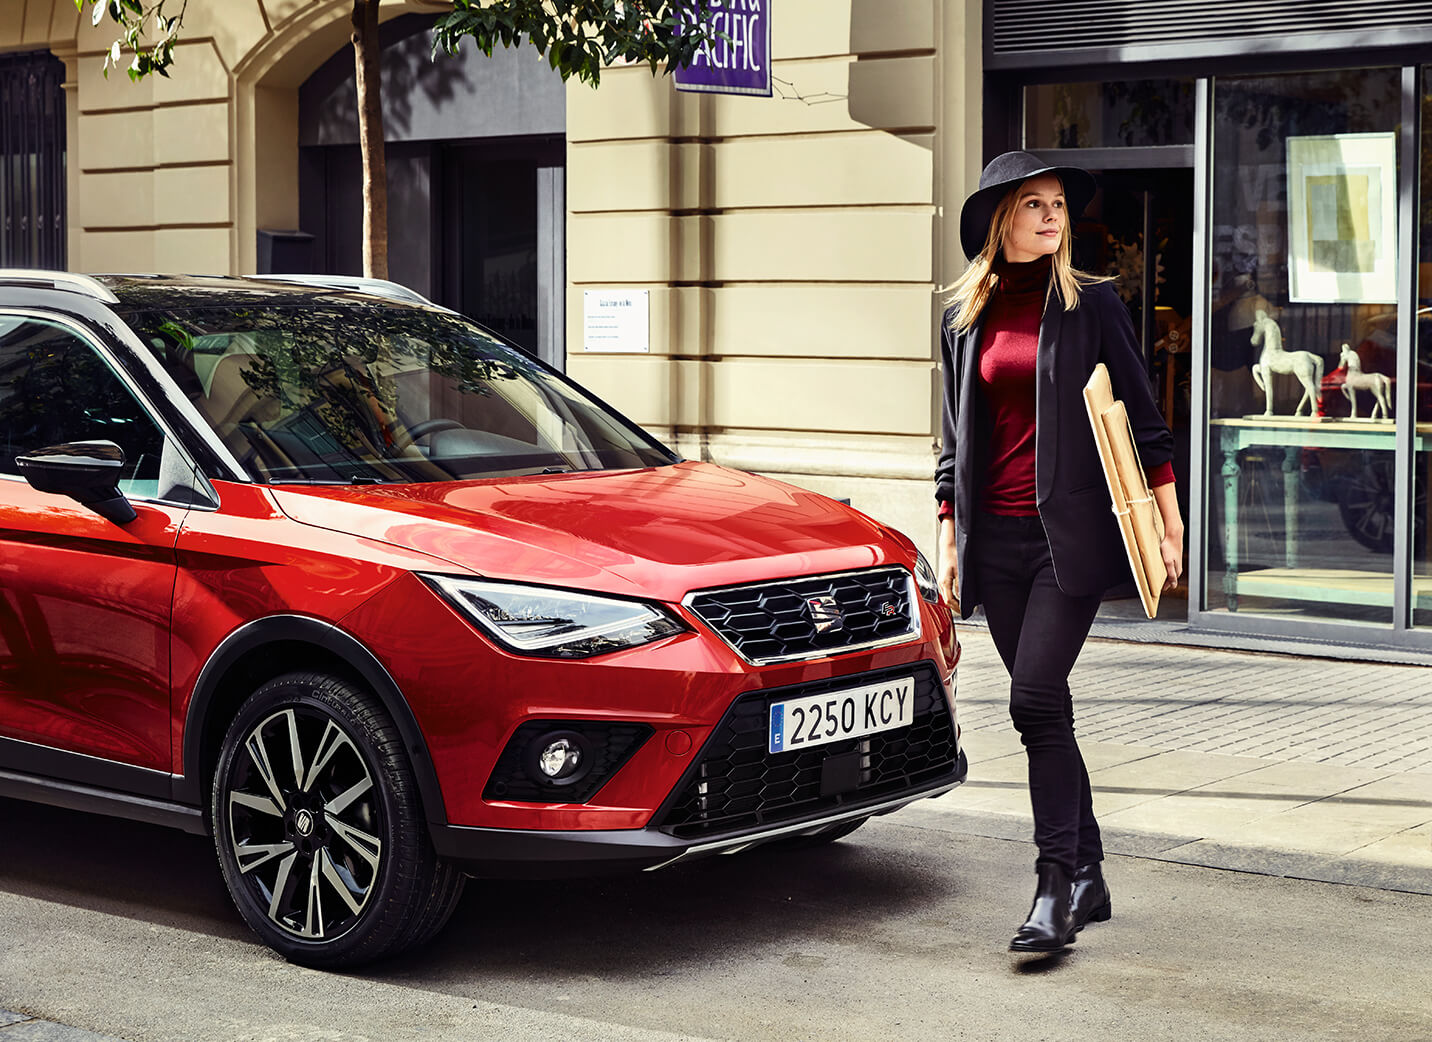 SEAT new car services and maintenance – Woman walking in front of a SEAT Arona crossover SUV